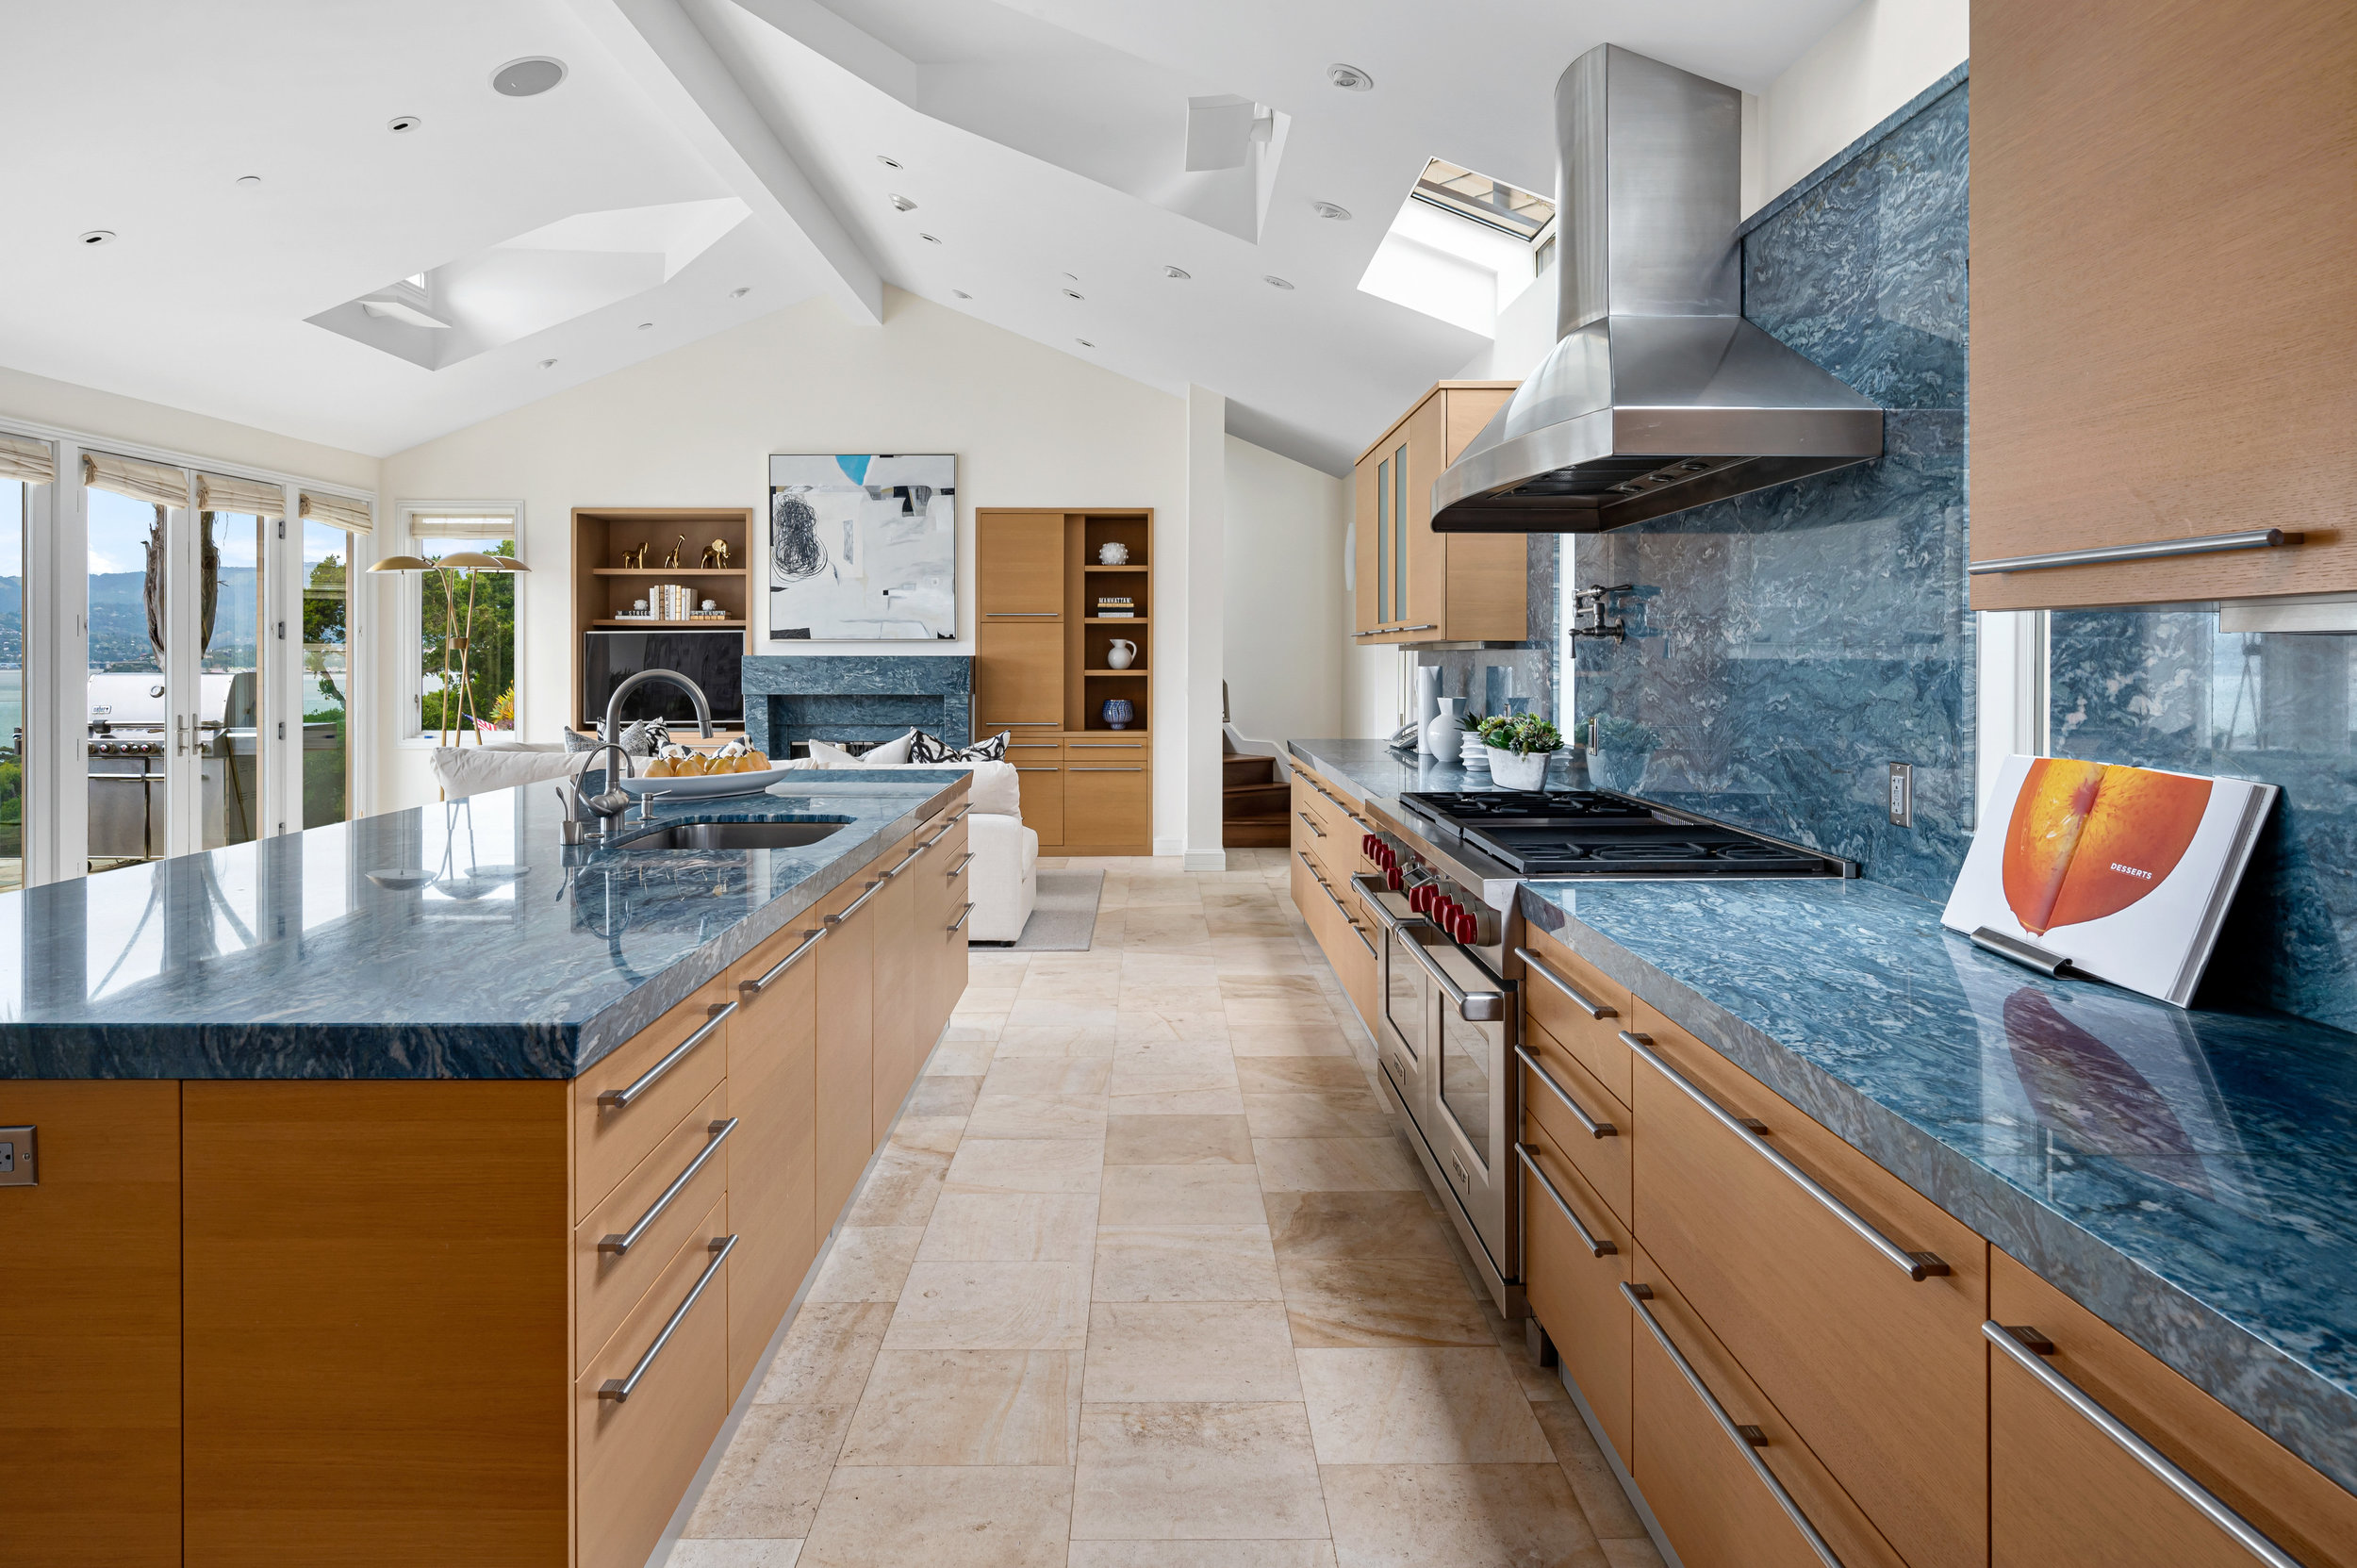 An open floor plan view of the kitchen and adjoining living area